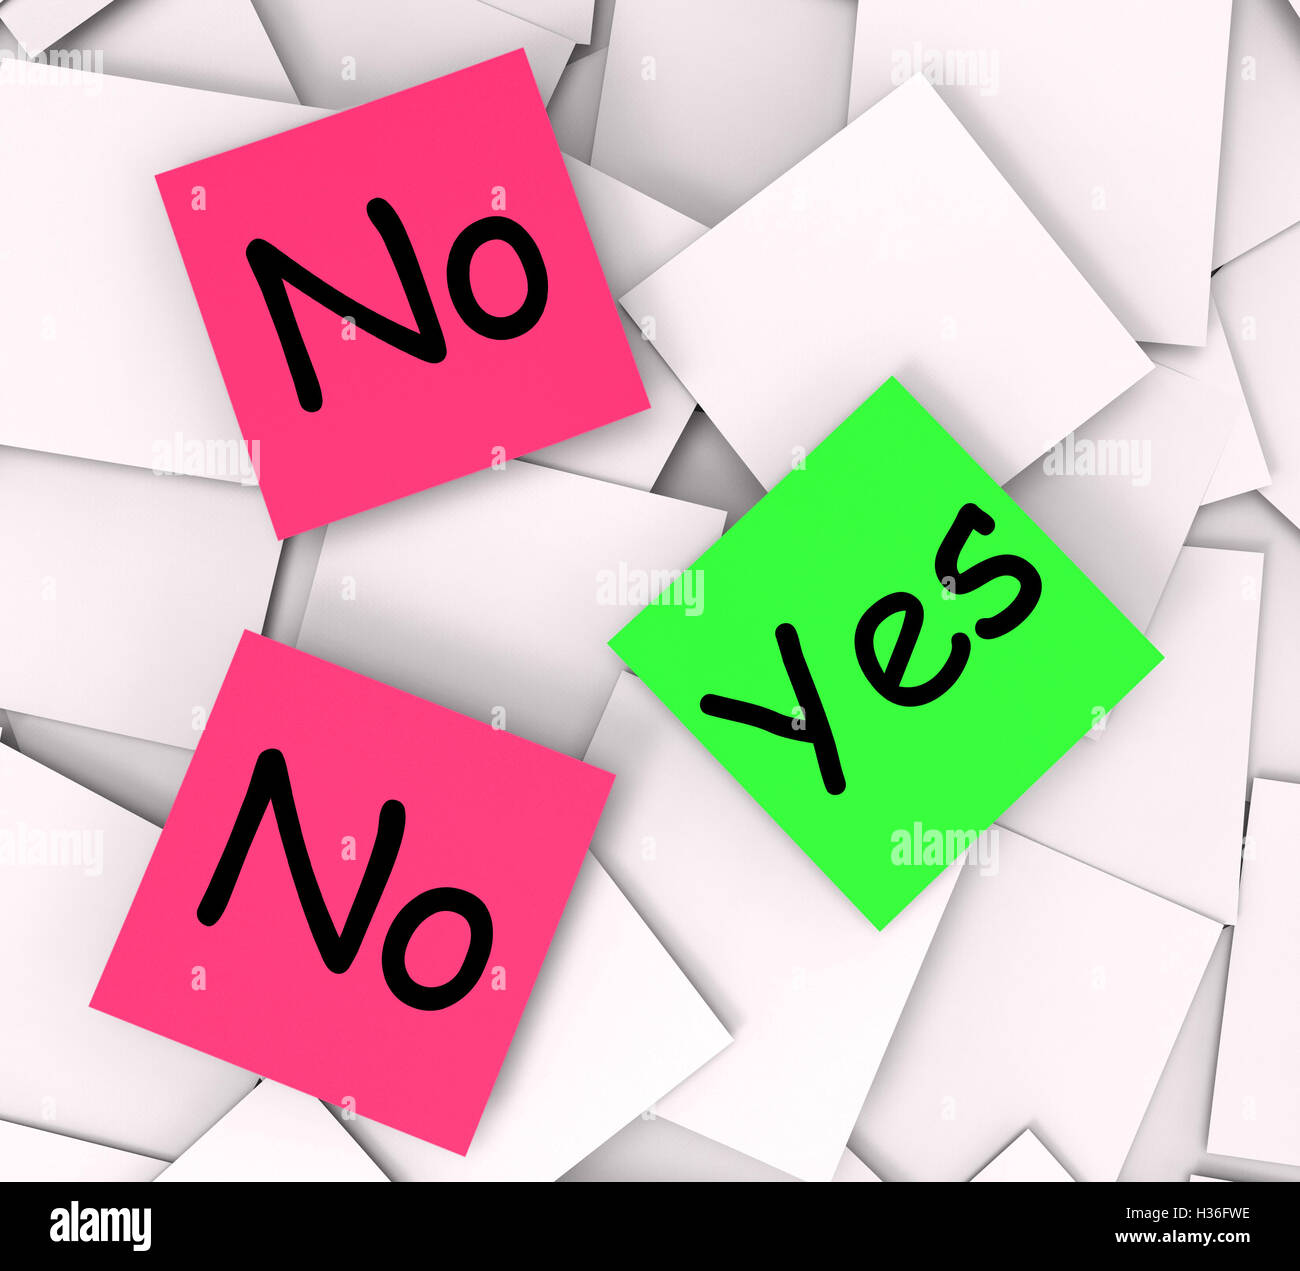 Yes No Post-It Notes Mean Answers Affirmative Or Negative Stock Photo